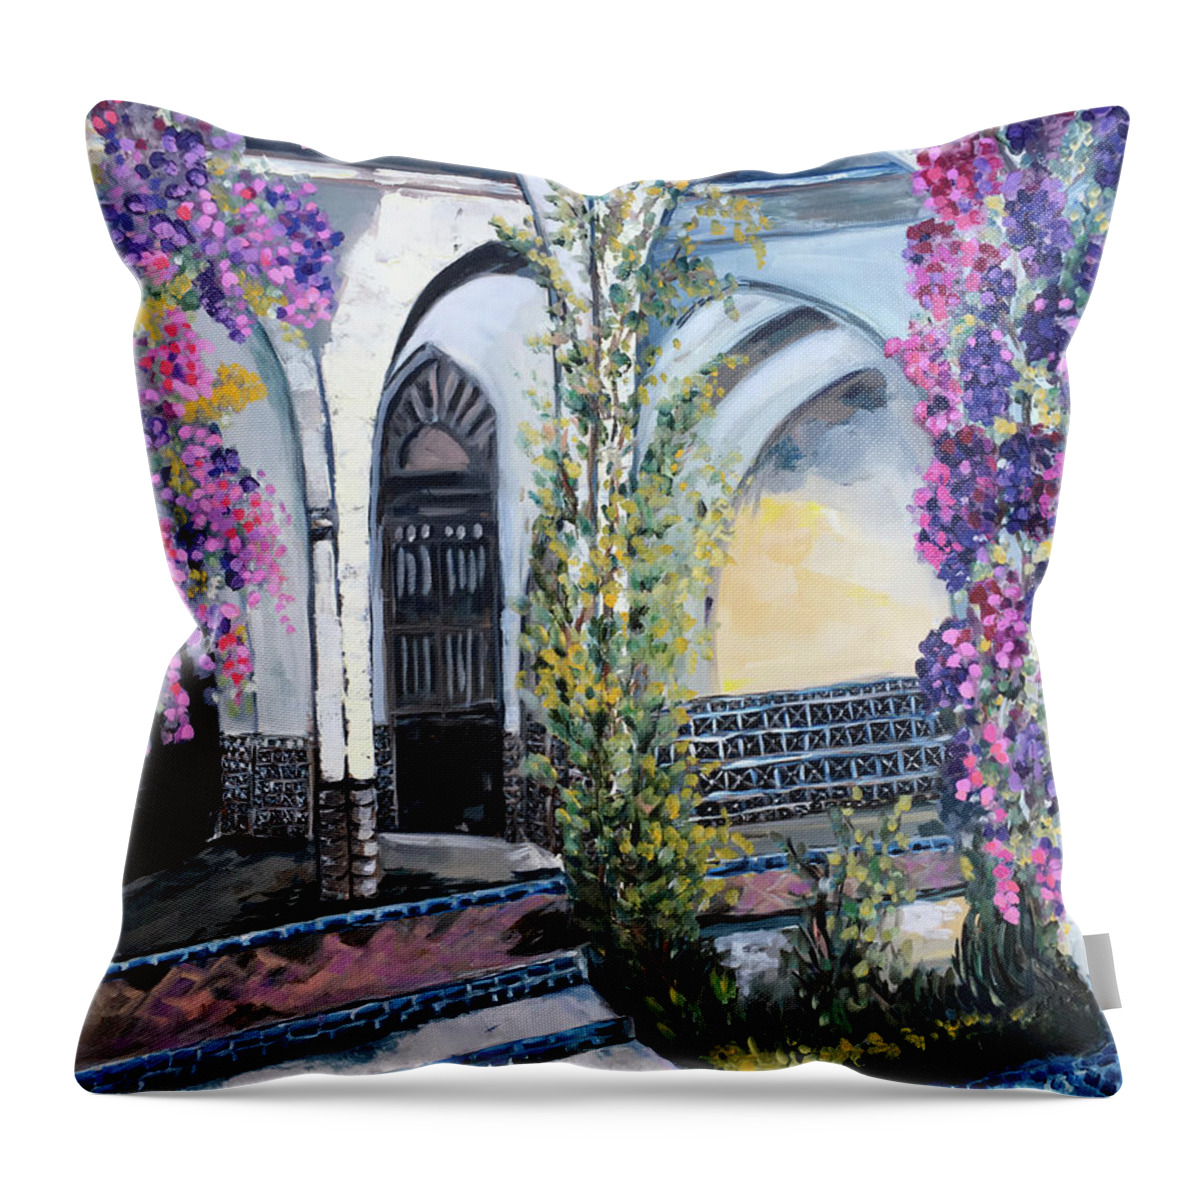 Paris Throw Pillow featuring the painting Paris Wisteria by Roxy Rich